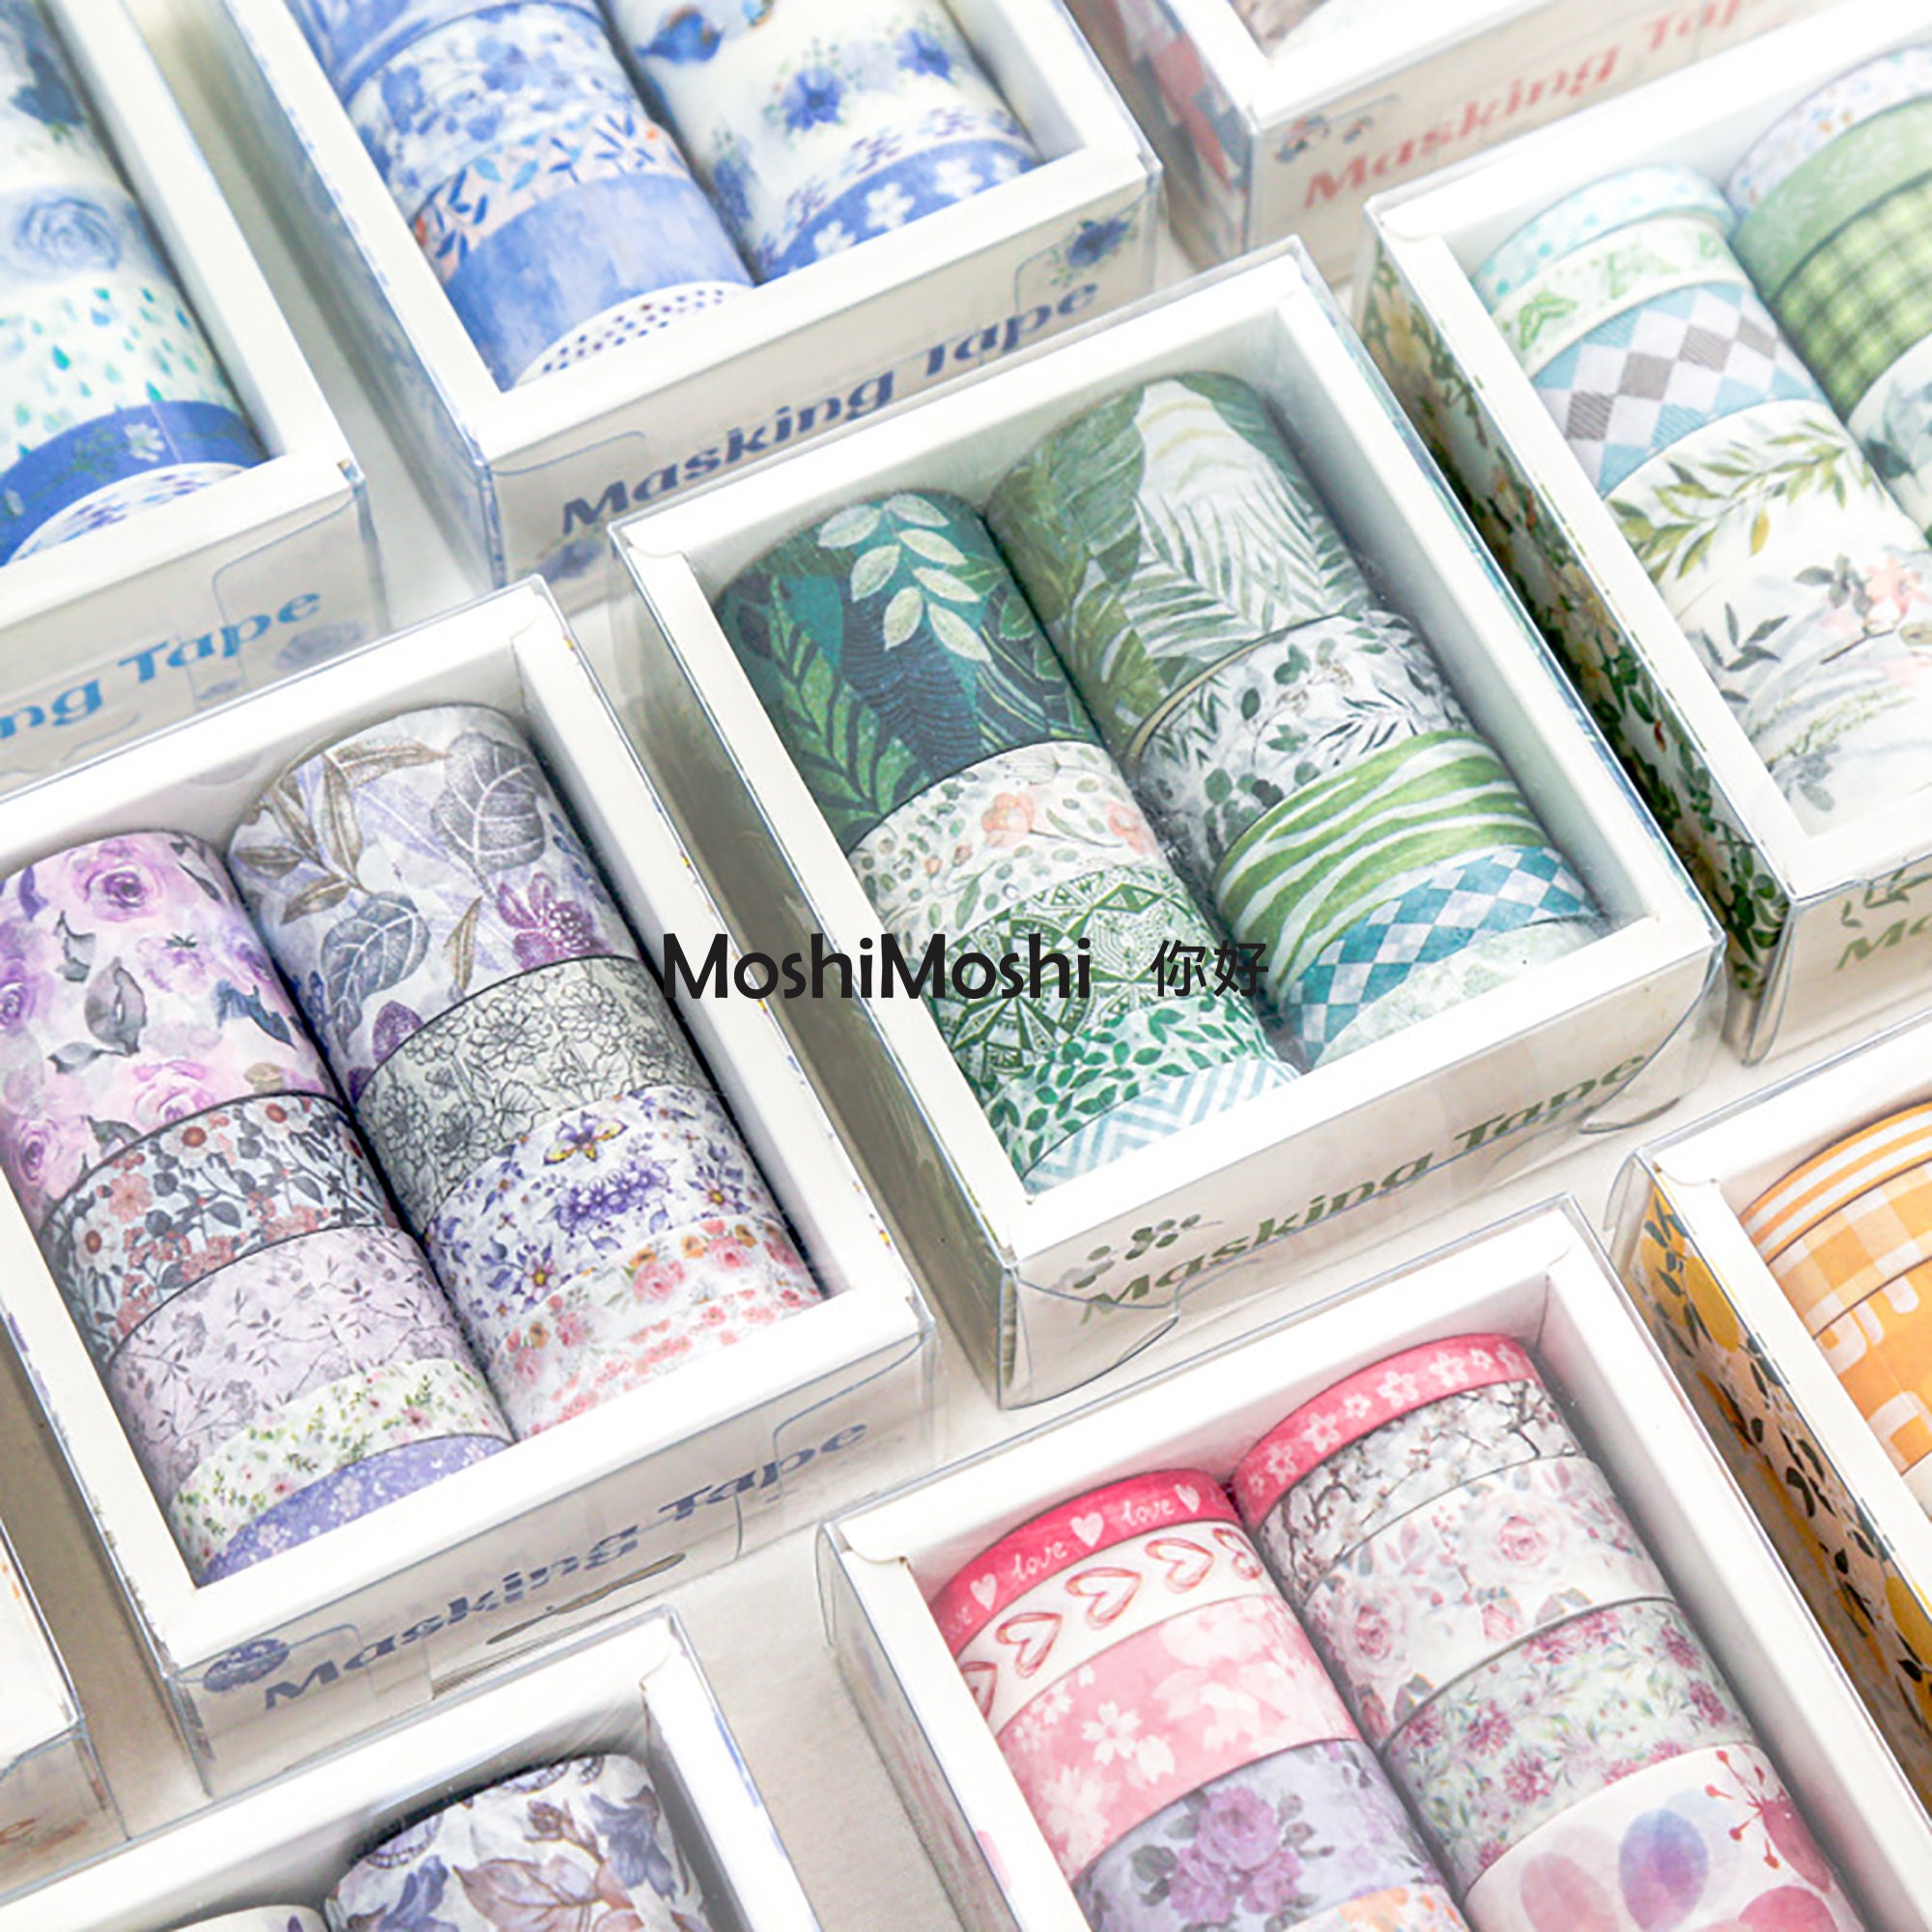 Floral Washi Tape, Eco Friendly Tape, Flowers, Stationery, Bullet